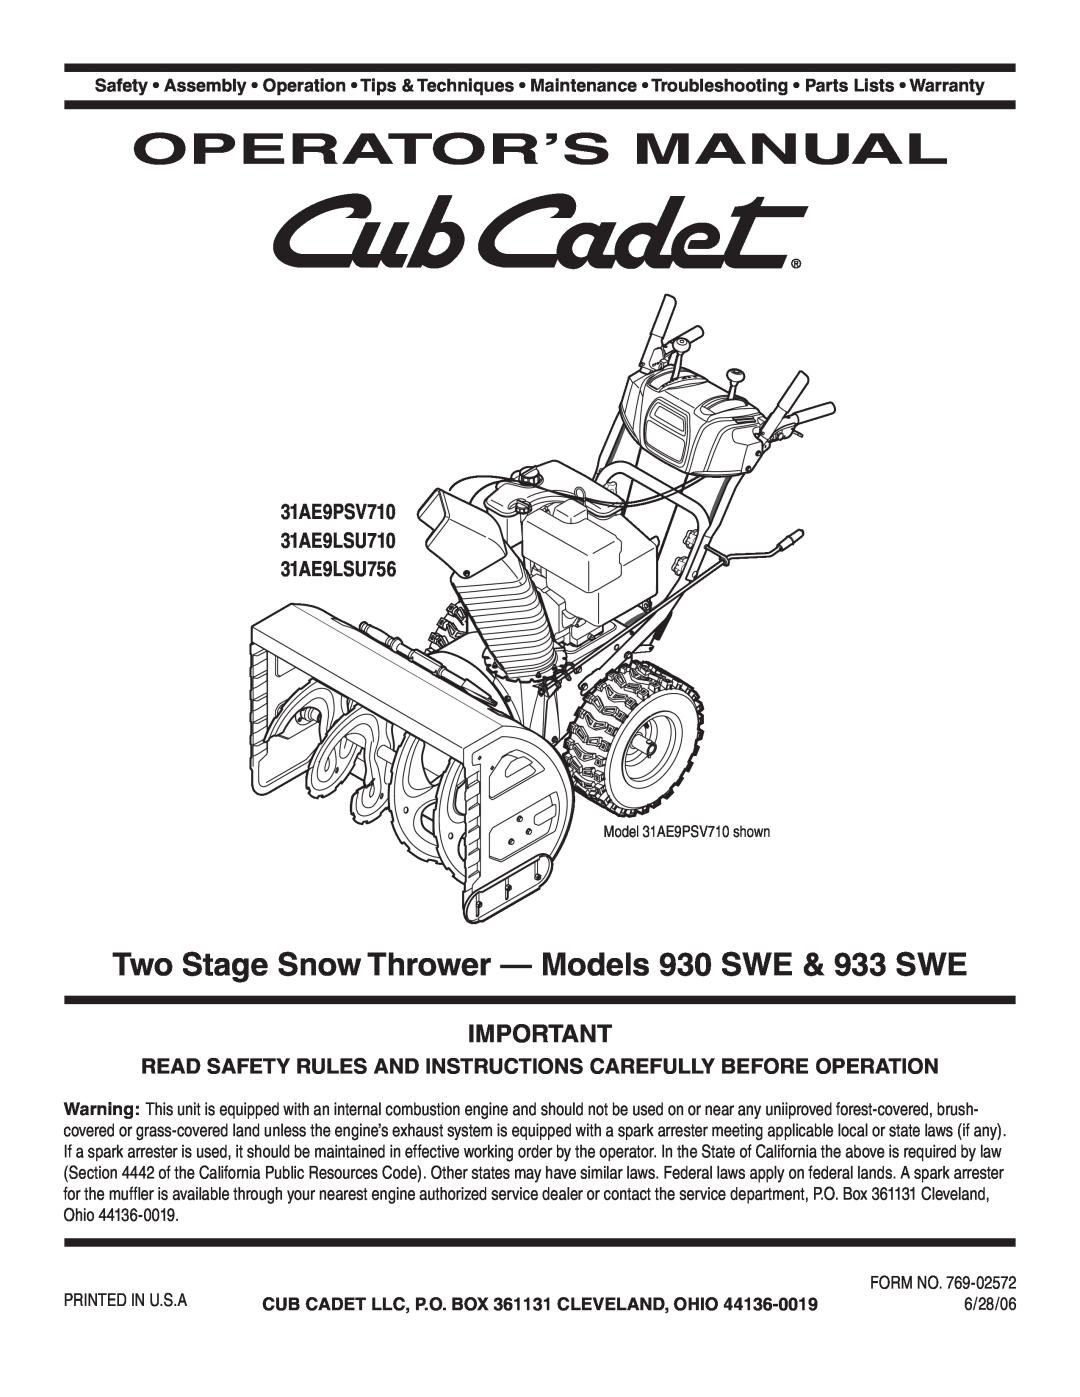 Cub Cadet warranty Operator’S Manual, Two Stage Snow Thrower - Models 930 SWE & 933 SWE 